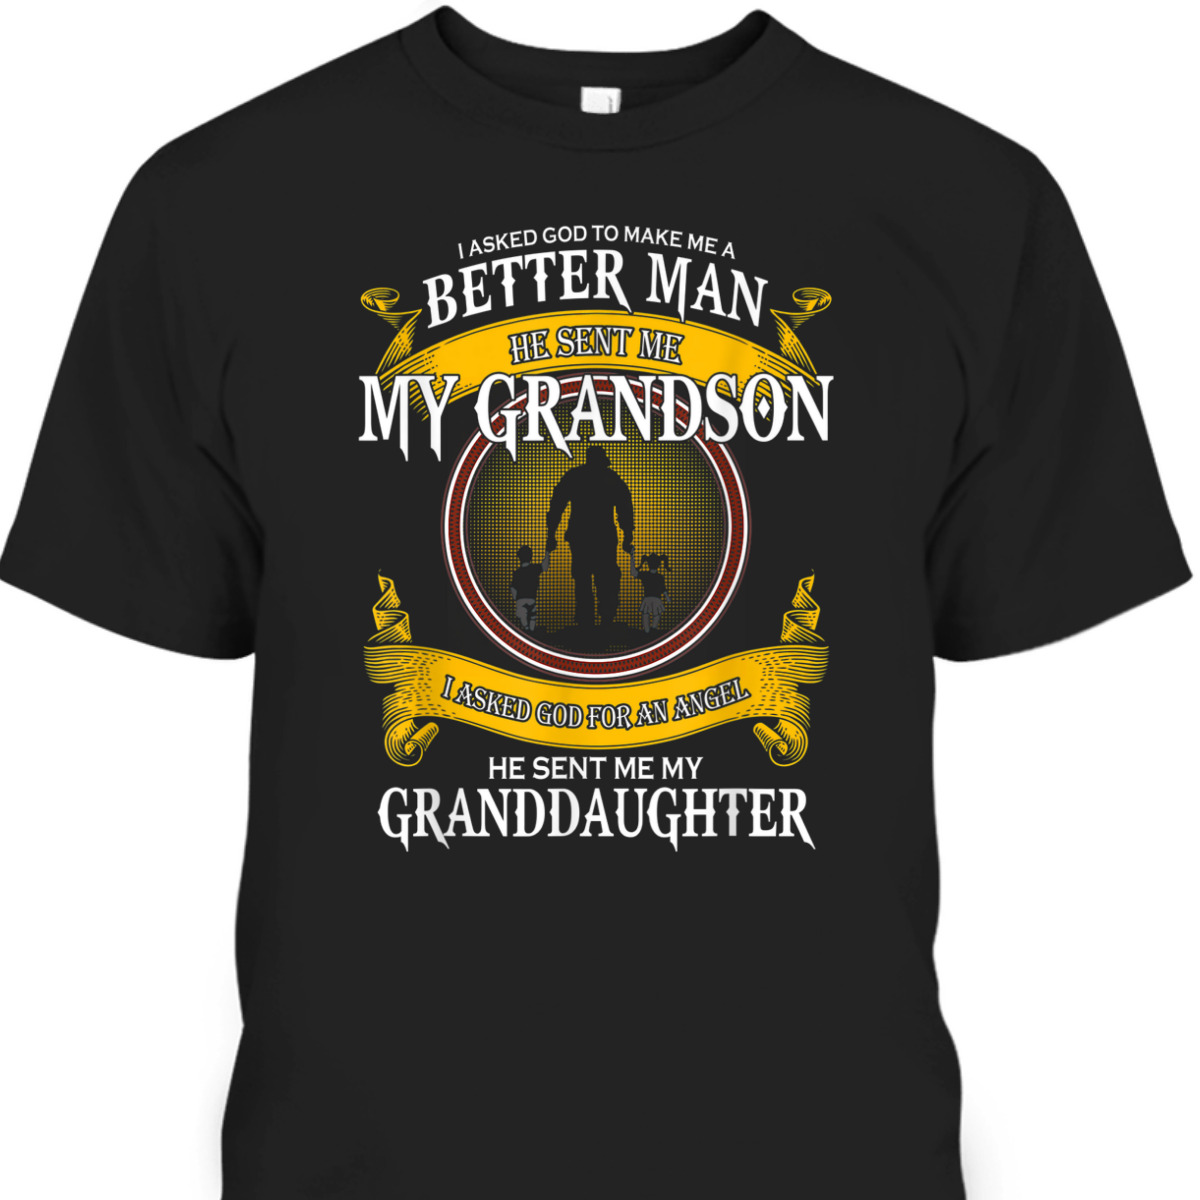 I Asked God To Make Me A Better Man He Sent Me My Grandson T-Shirt Father's Day Gift